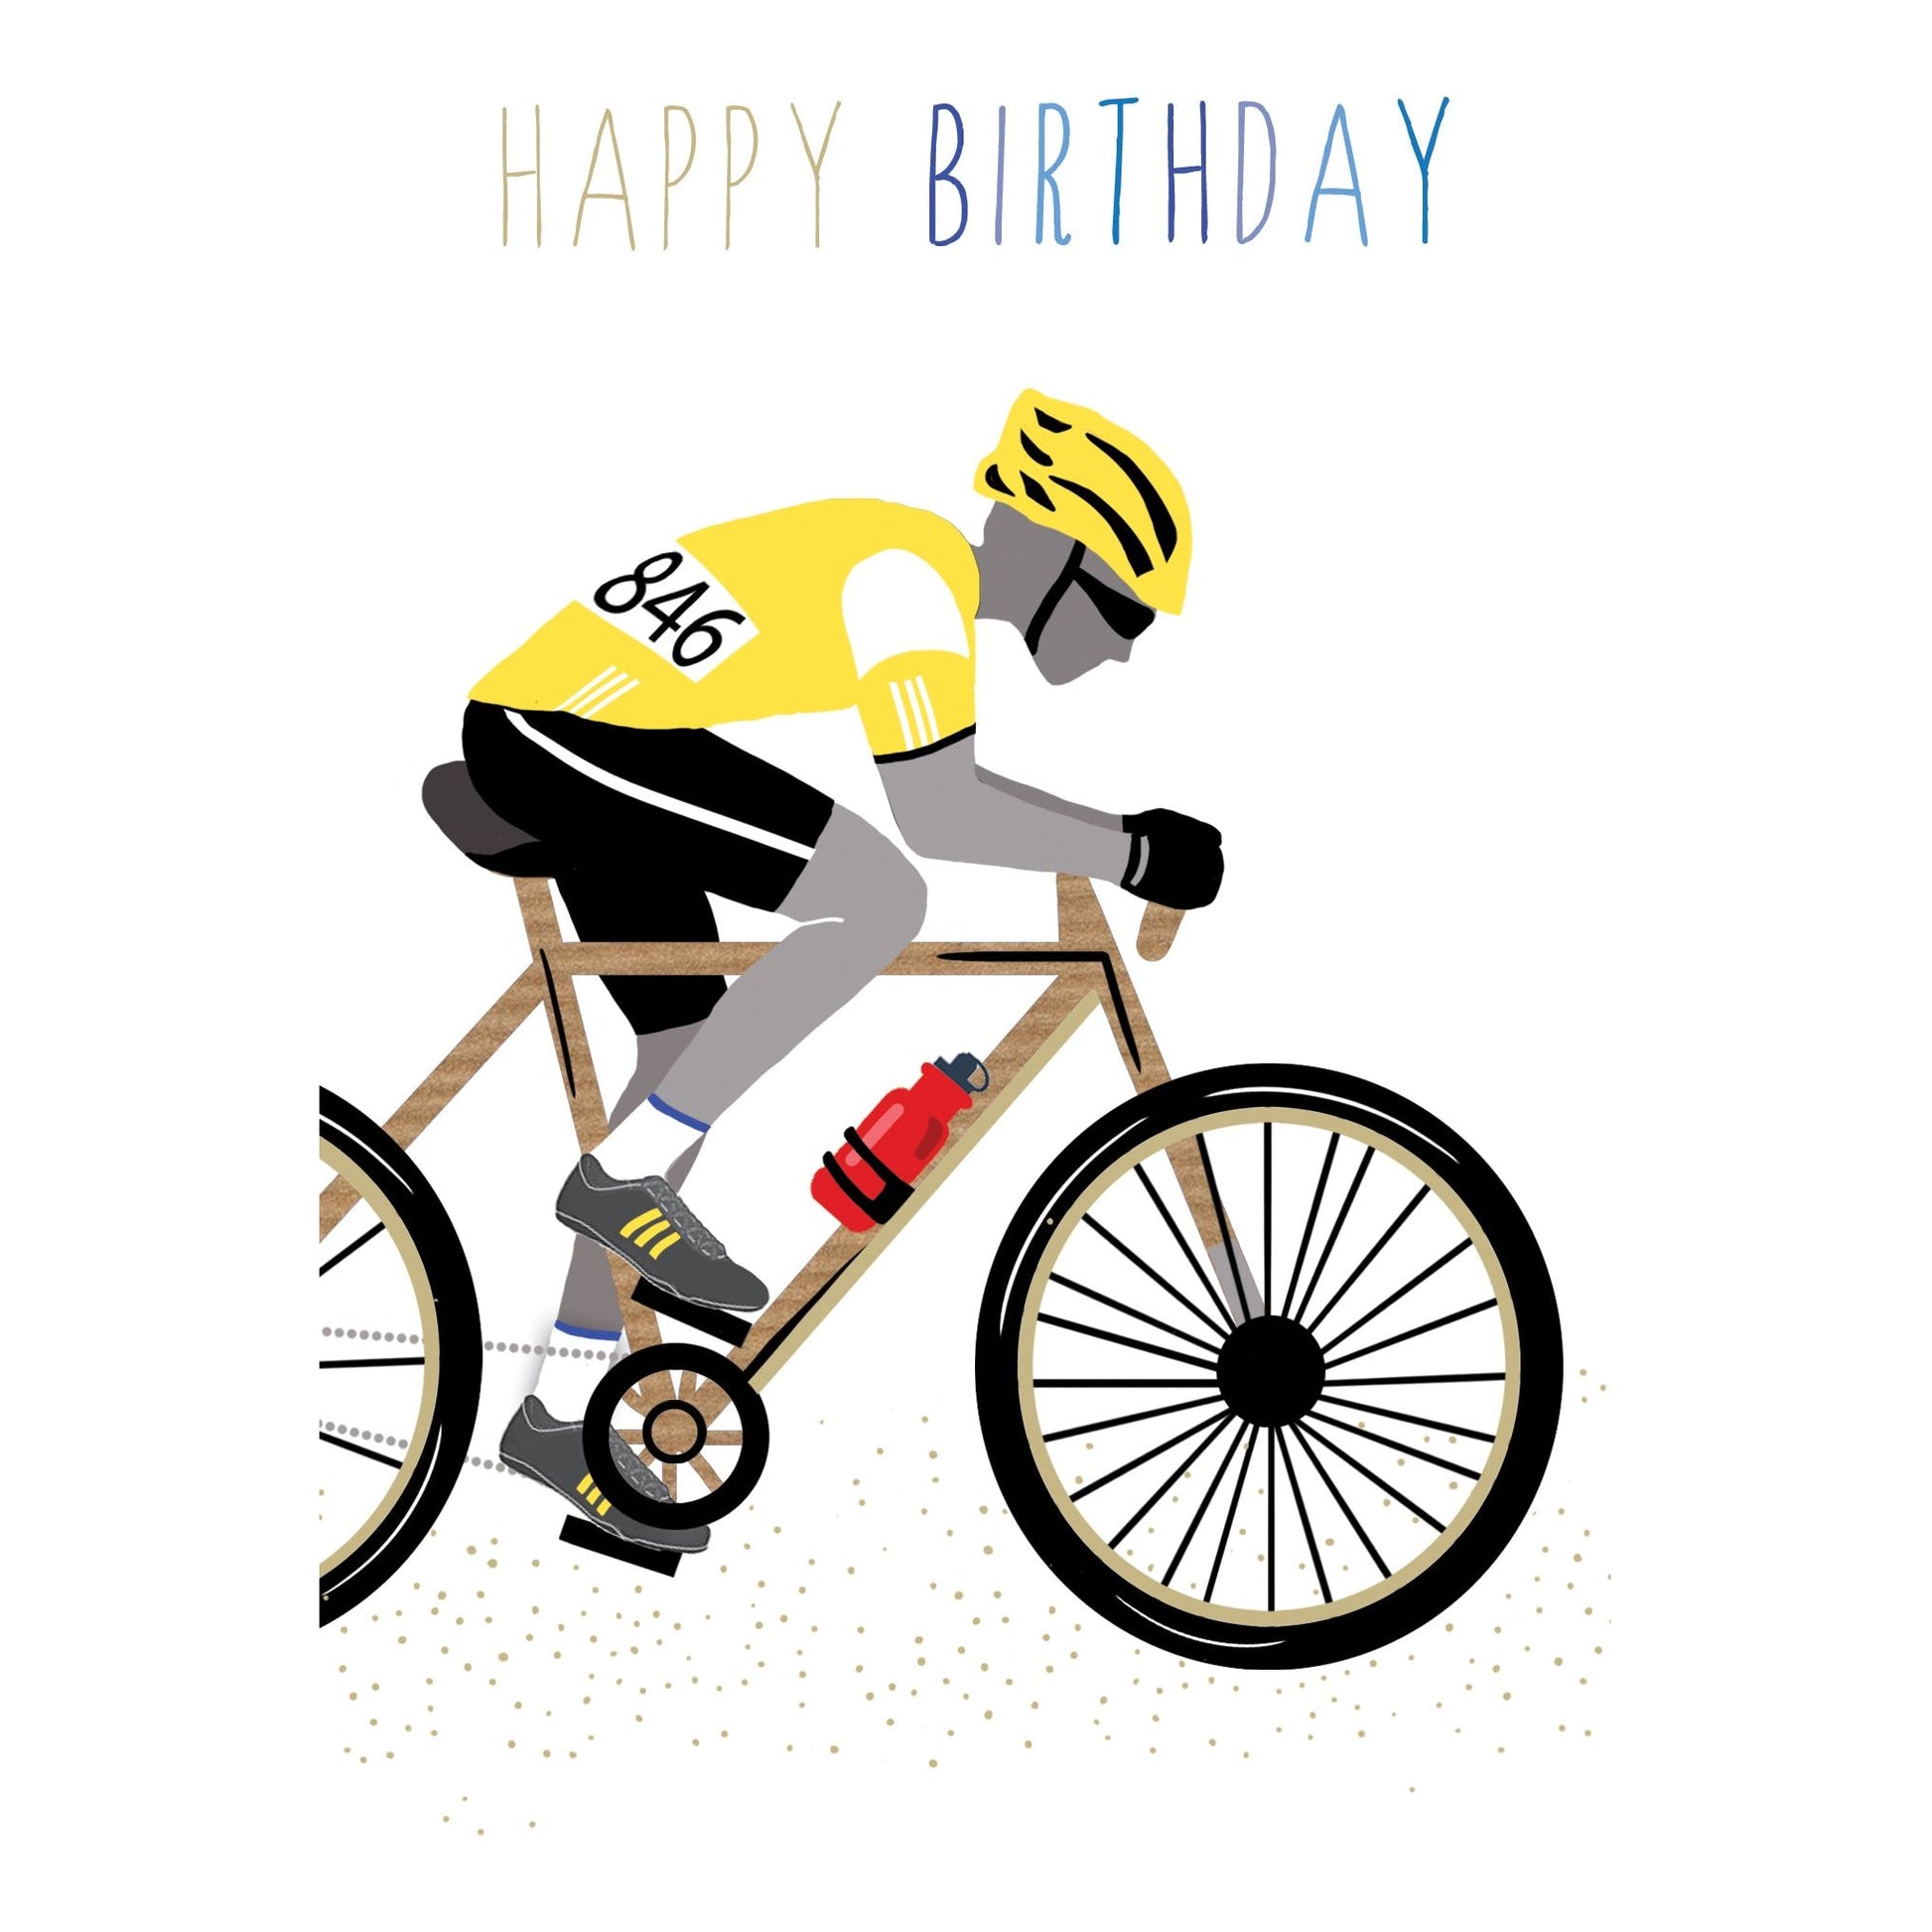 Birthday For Him Card Bicycling Sara Miller - Cardmore